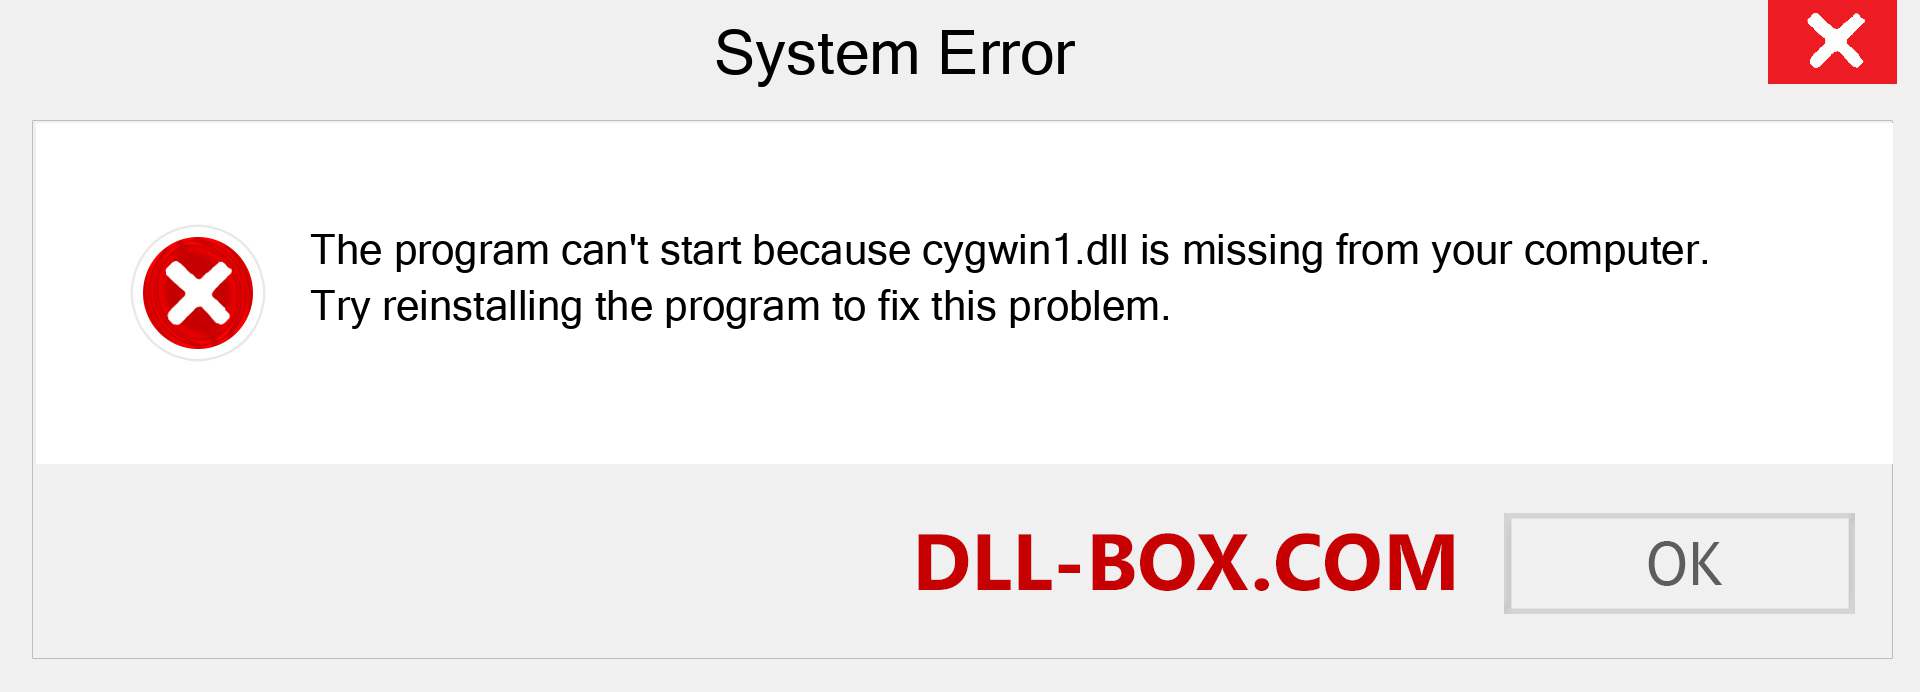 failed to start because cygwin1.dll was not found